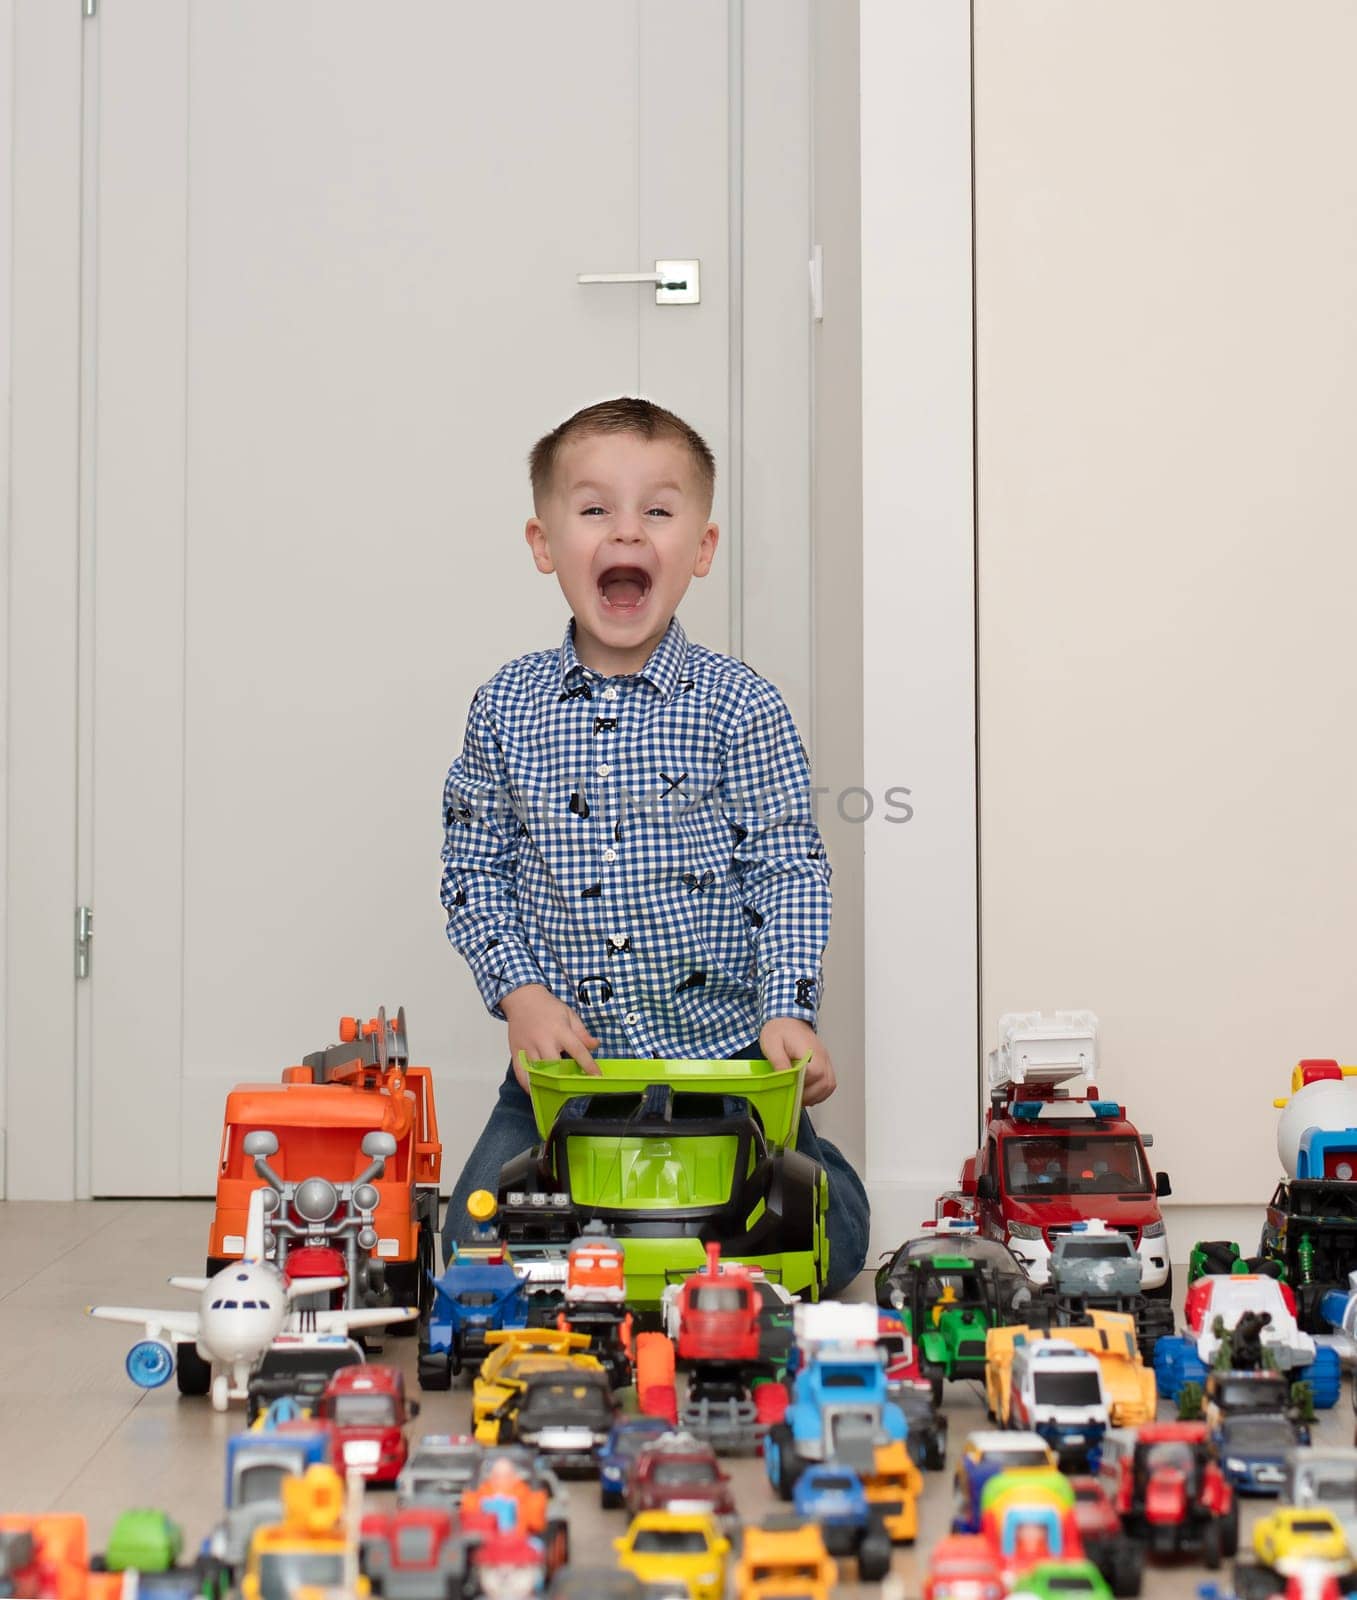 Concept of children's toys. A little boy, 4 years old, cheerful and handsome, happily plays, sitting on the floor, with multi-colored small and large cars in the children's room. Soft focus